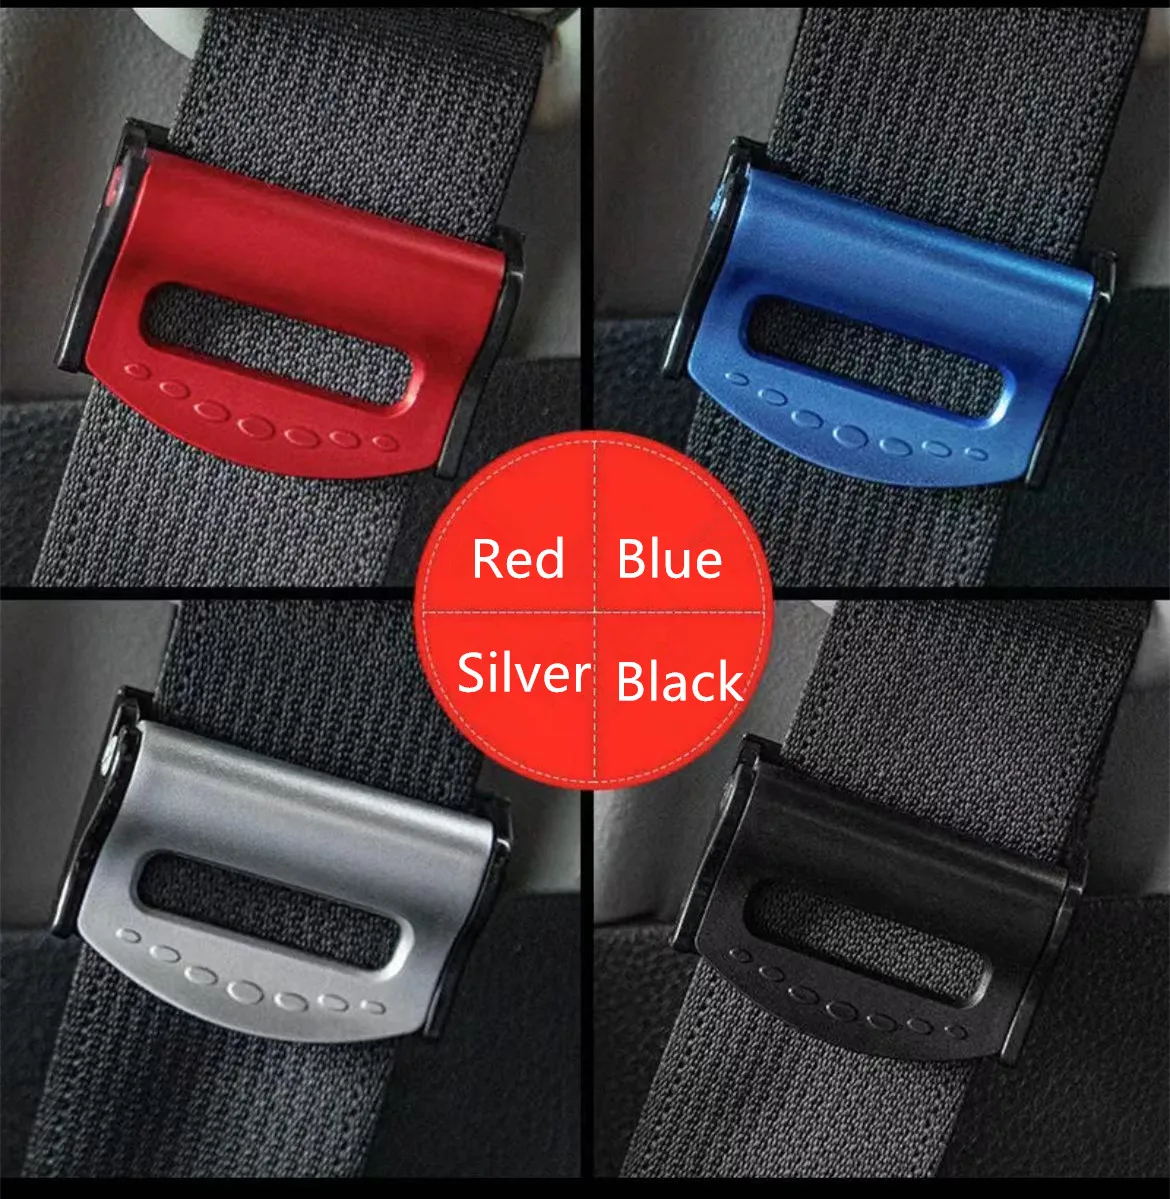 

2pcs Auto Seat Belts Clips Safety Accessories Sticker For Volvo Xc60 S60 s40 S80 V40 V60 v70 v50 850 c30 XC90 s90 v90 xc70 s70